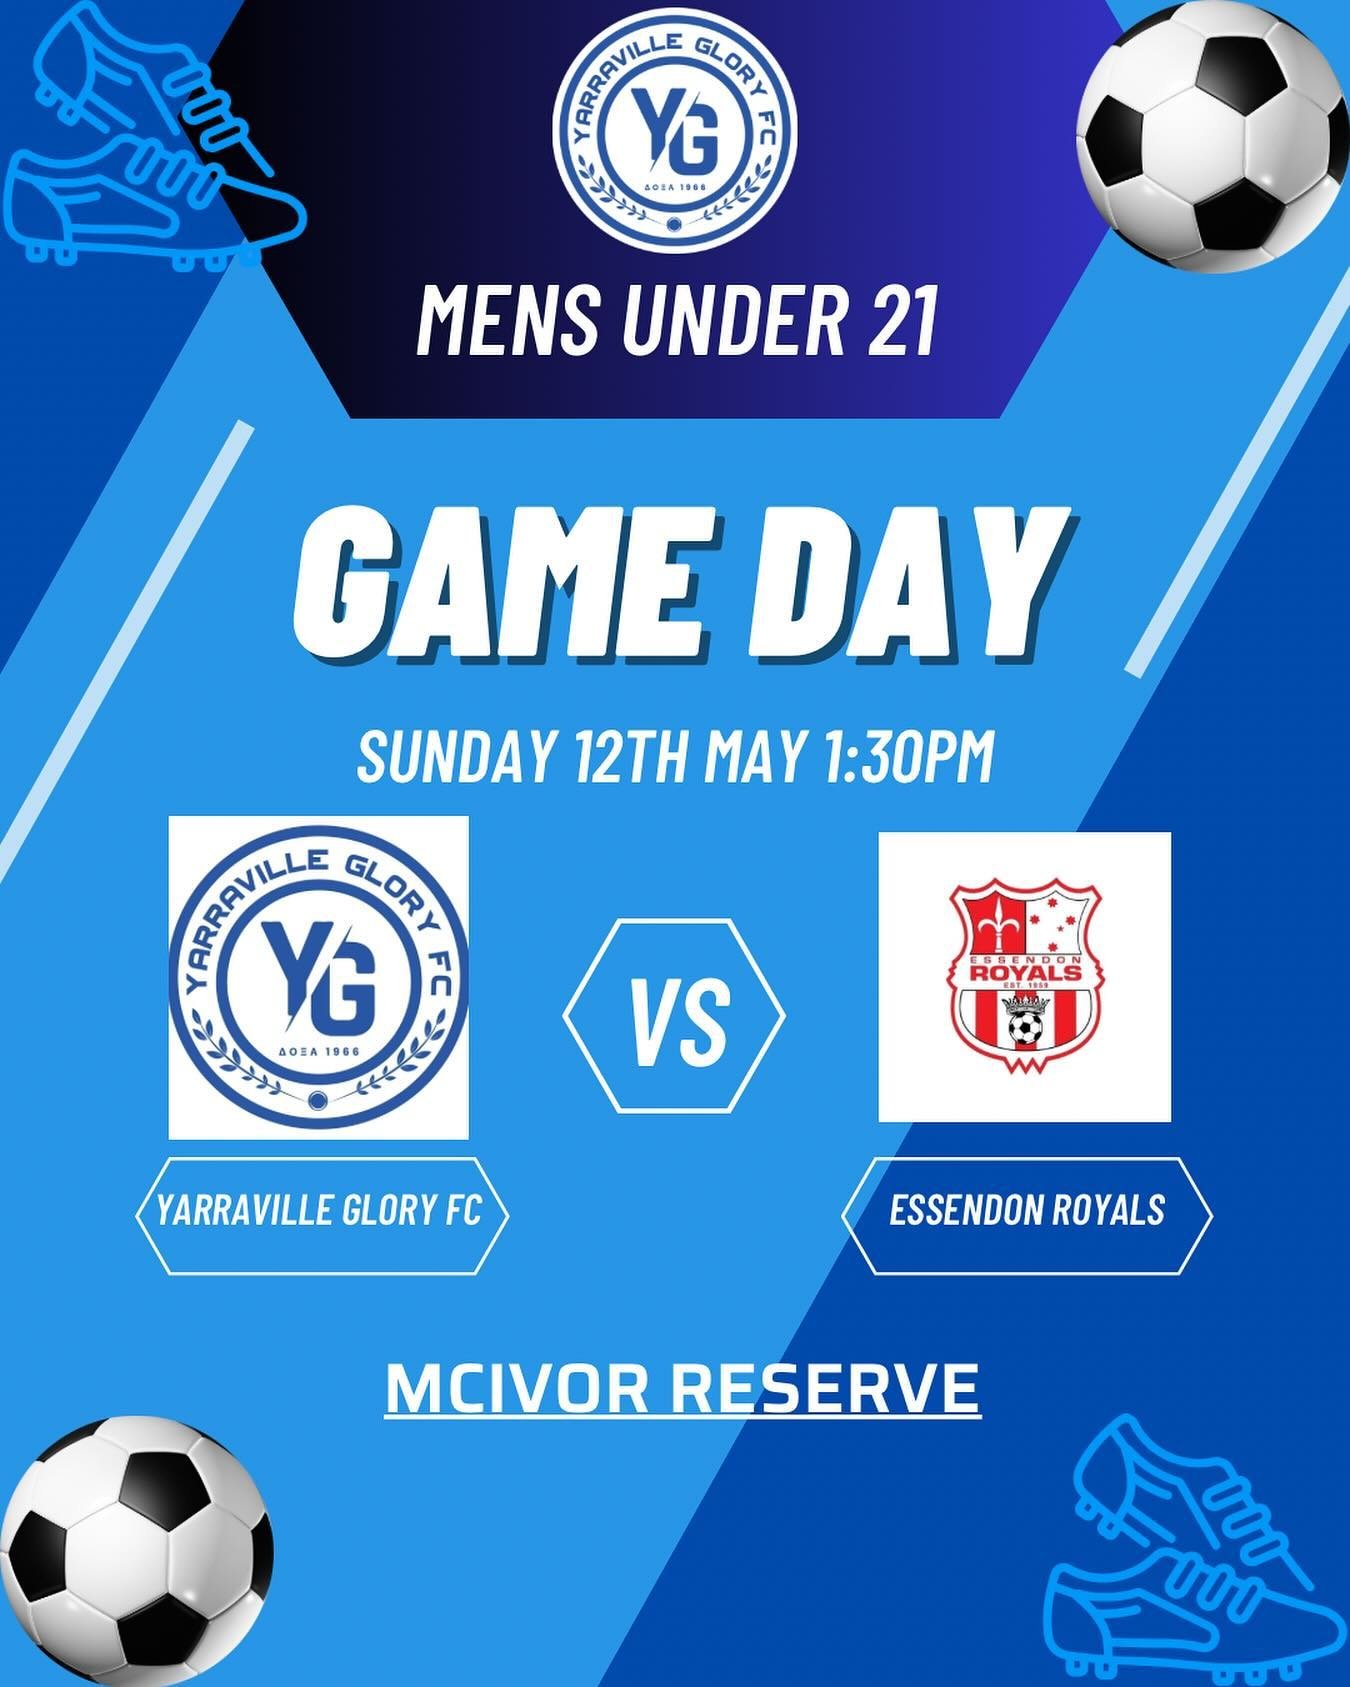 Our U21&rsquo;s continue their season tomorrow at home vs Essendon Royals.  Get down to McIvor Reserve and support the boys #doxa #ygfc #glory